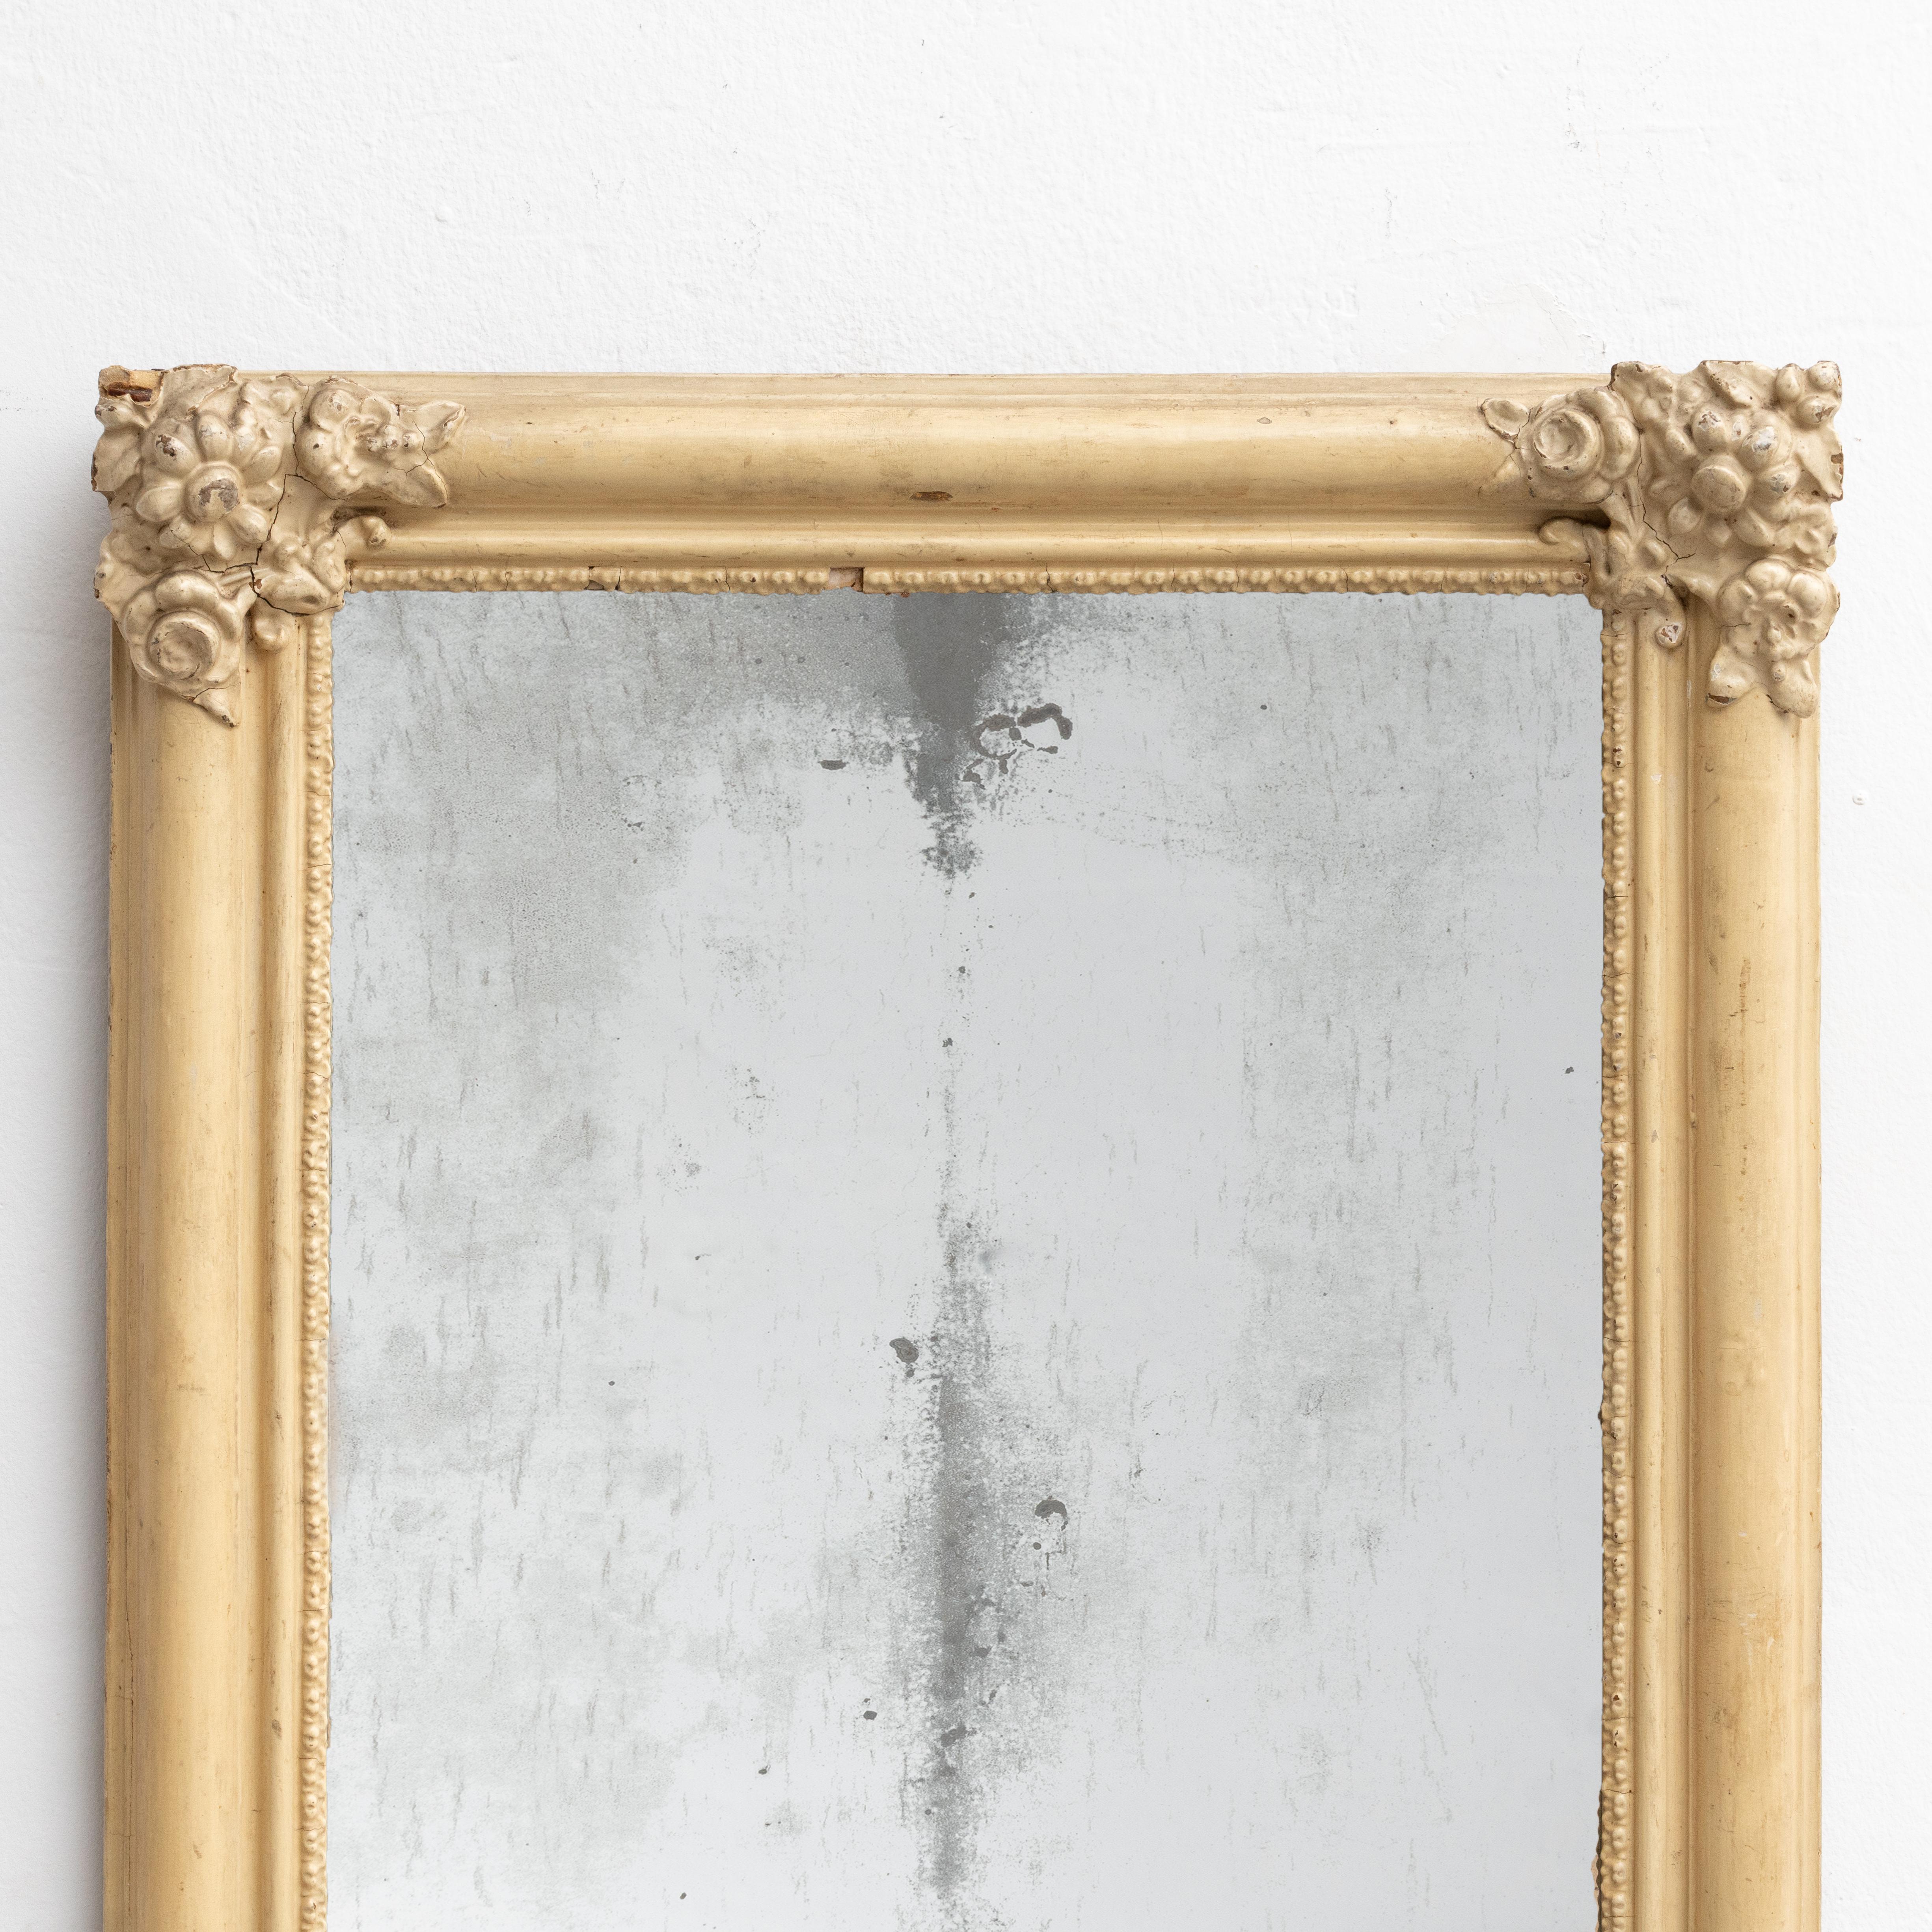 Spanish Mid-Century Modern Handcrafted Wood Mirror, circa 1950 For Sale 8